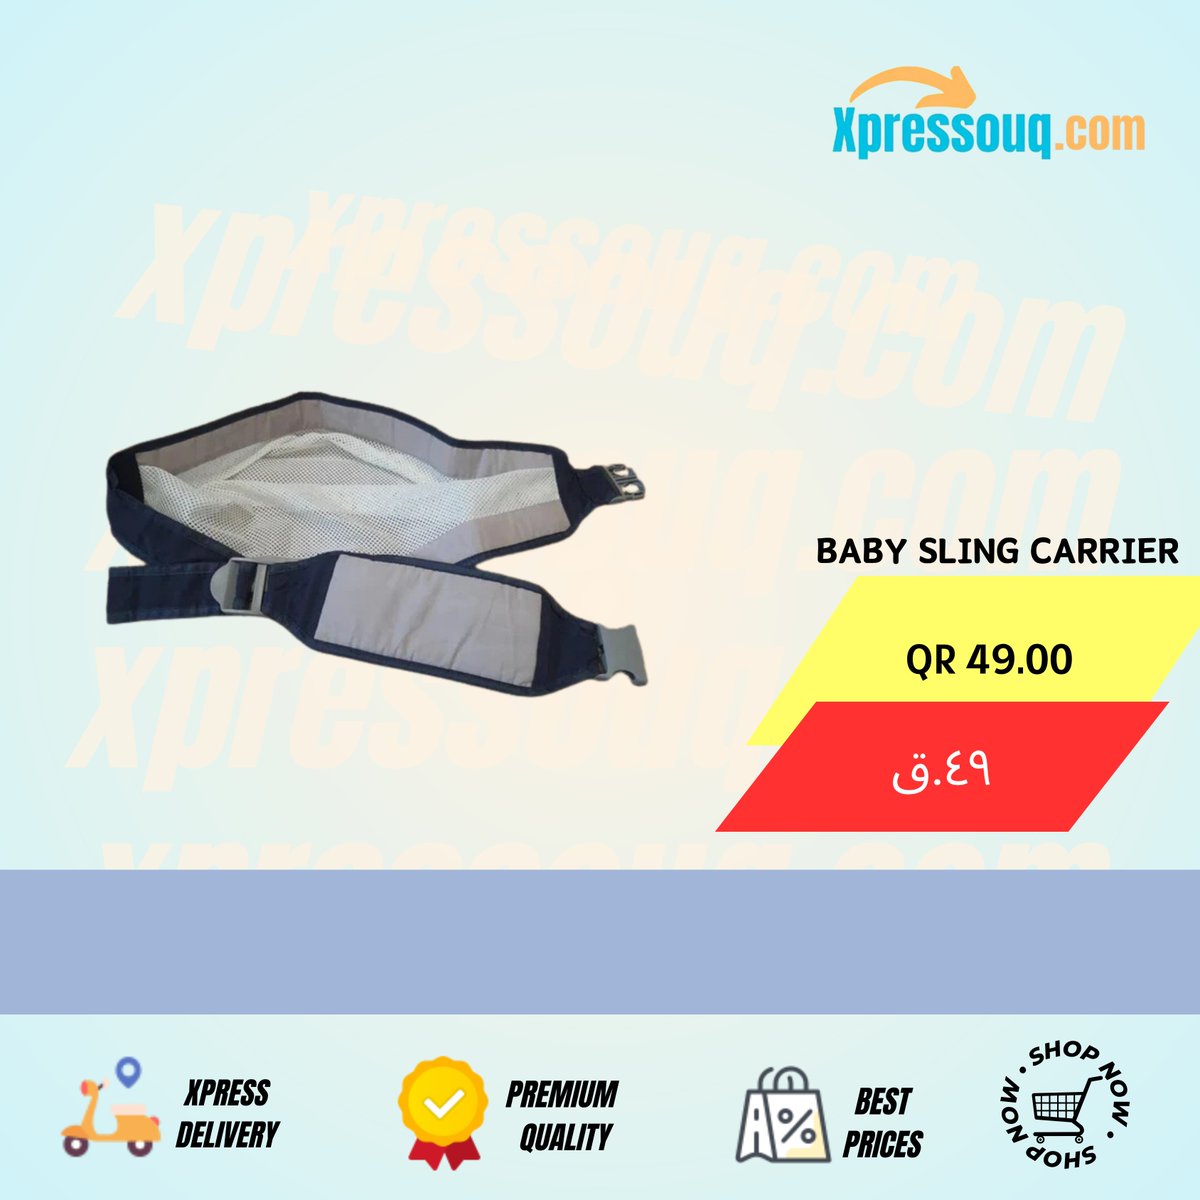 Closest cuddles, hands-free! BabySling

🎯Order Now @ Just QR 49 only 🏃🏻‍
💸Cash on Delivery💸
🚗xpress Delivery🛻

xpressouq.com/products/baby-…

#BabyLove #ParentingEssentials #HandsFreeParenting #BabyWearing #ParentingWin #MomLife #DadLife #BabySling #BabyCarrier #ParentingOnTheGo